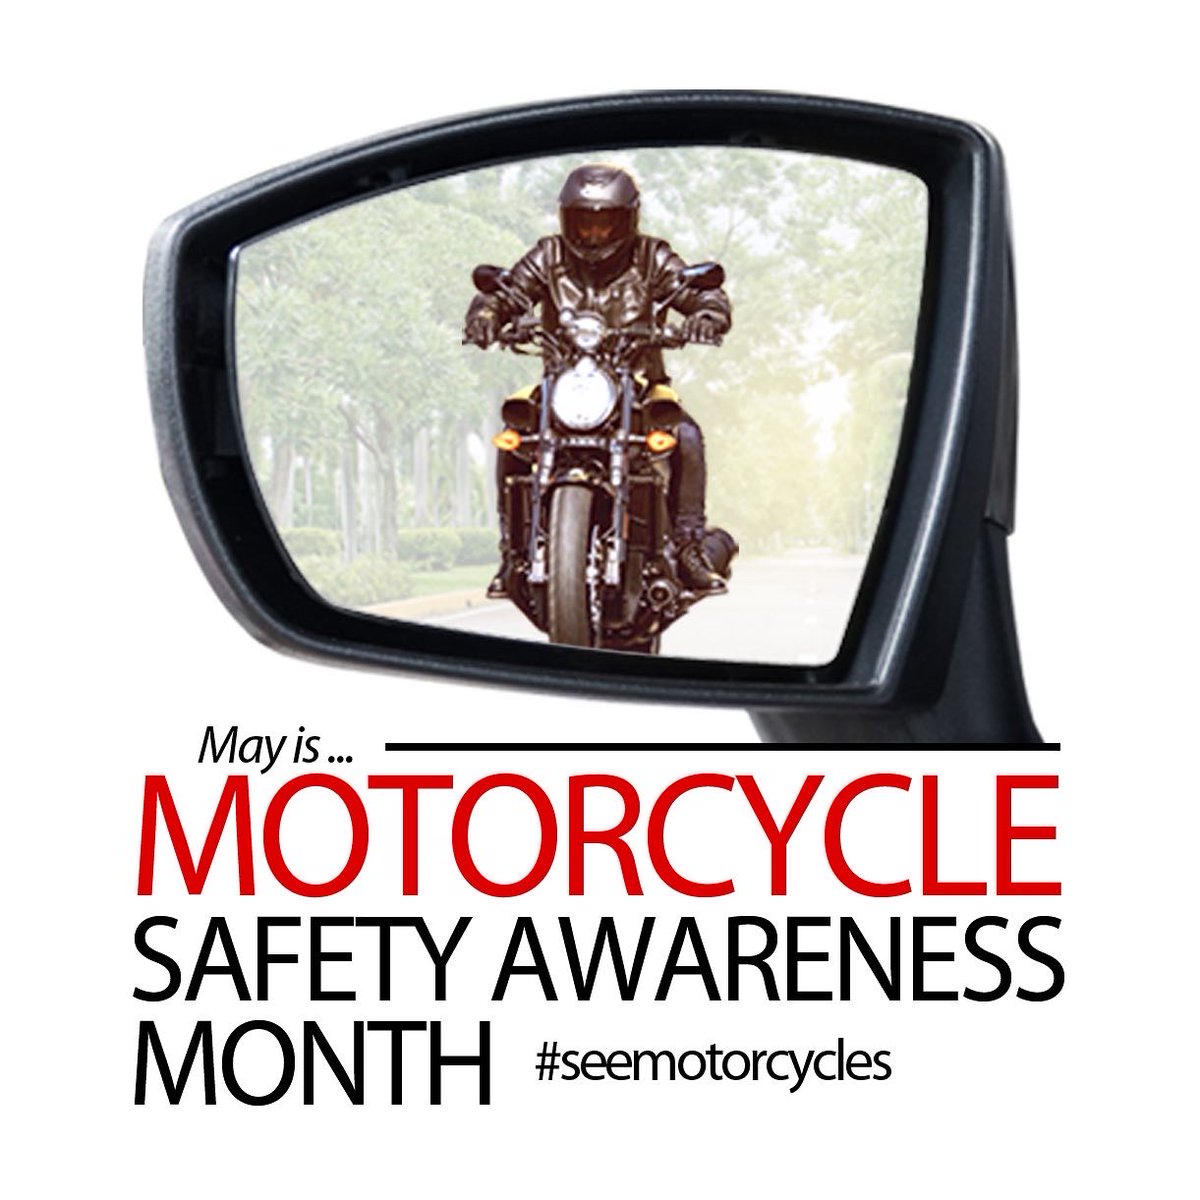 May is Motorcycle Safety Awareness Month and Suzuki wants to remind everyone to be aware of motorcycles in traffic 

For more information on Motorcycle Safety Foundation courses visit MSF-USA.org.

#MotorcycleSafetyAwarenessMonth #Suzuki #SuzukiCycles #SeeMotorcycles